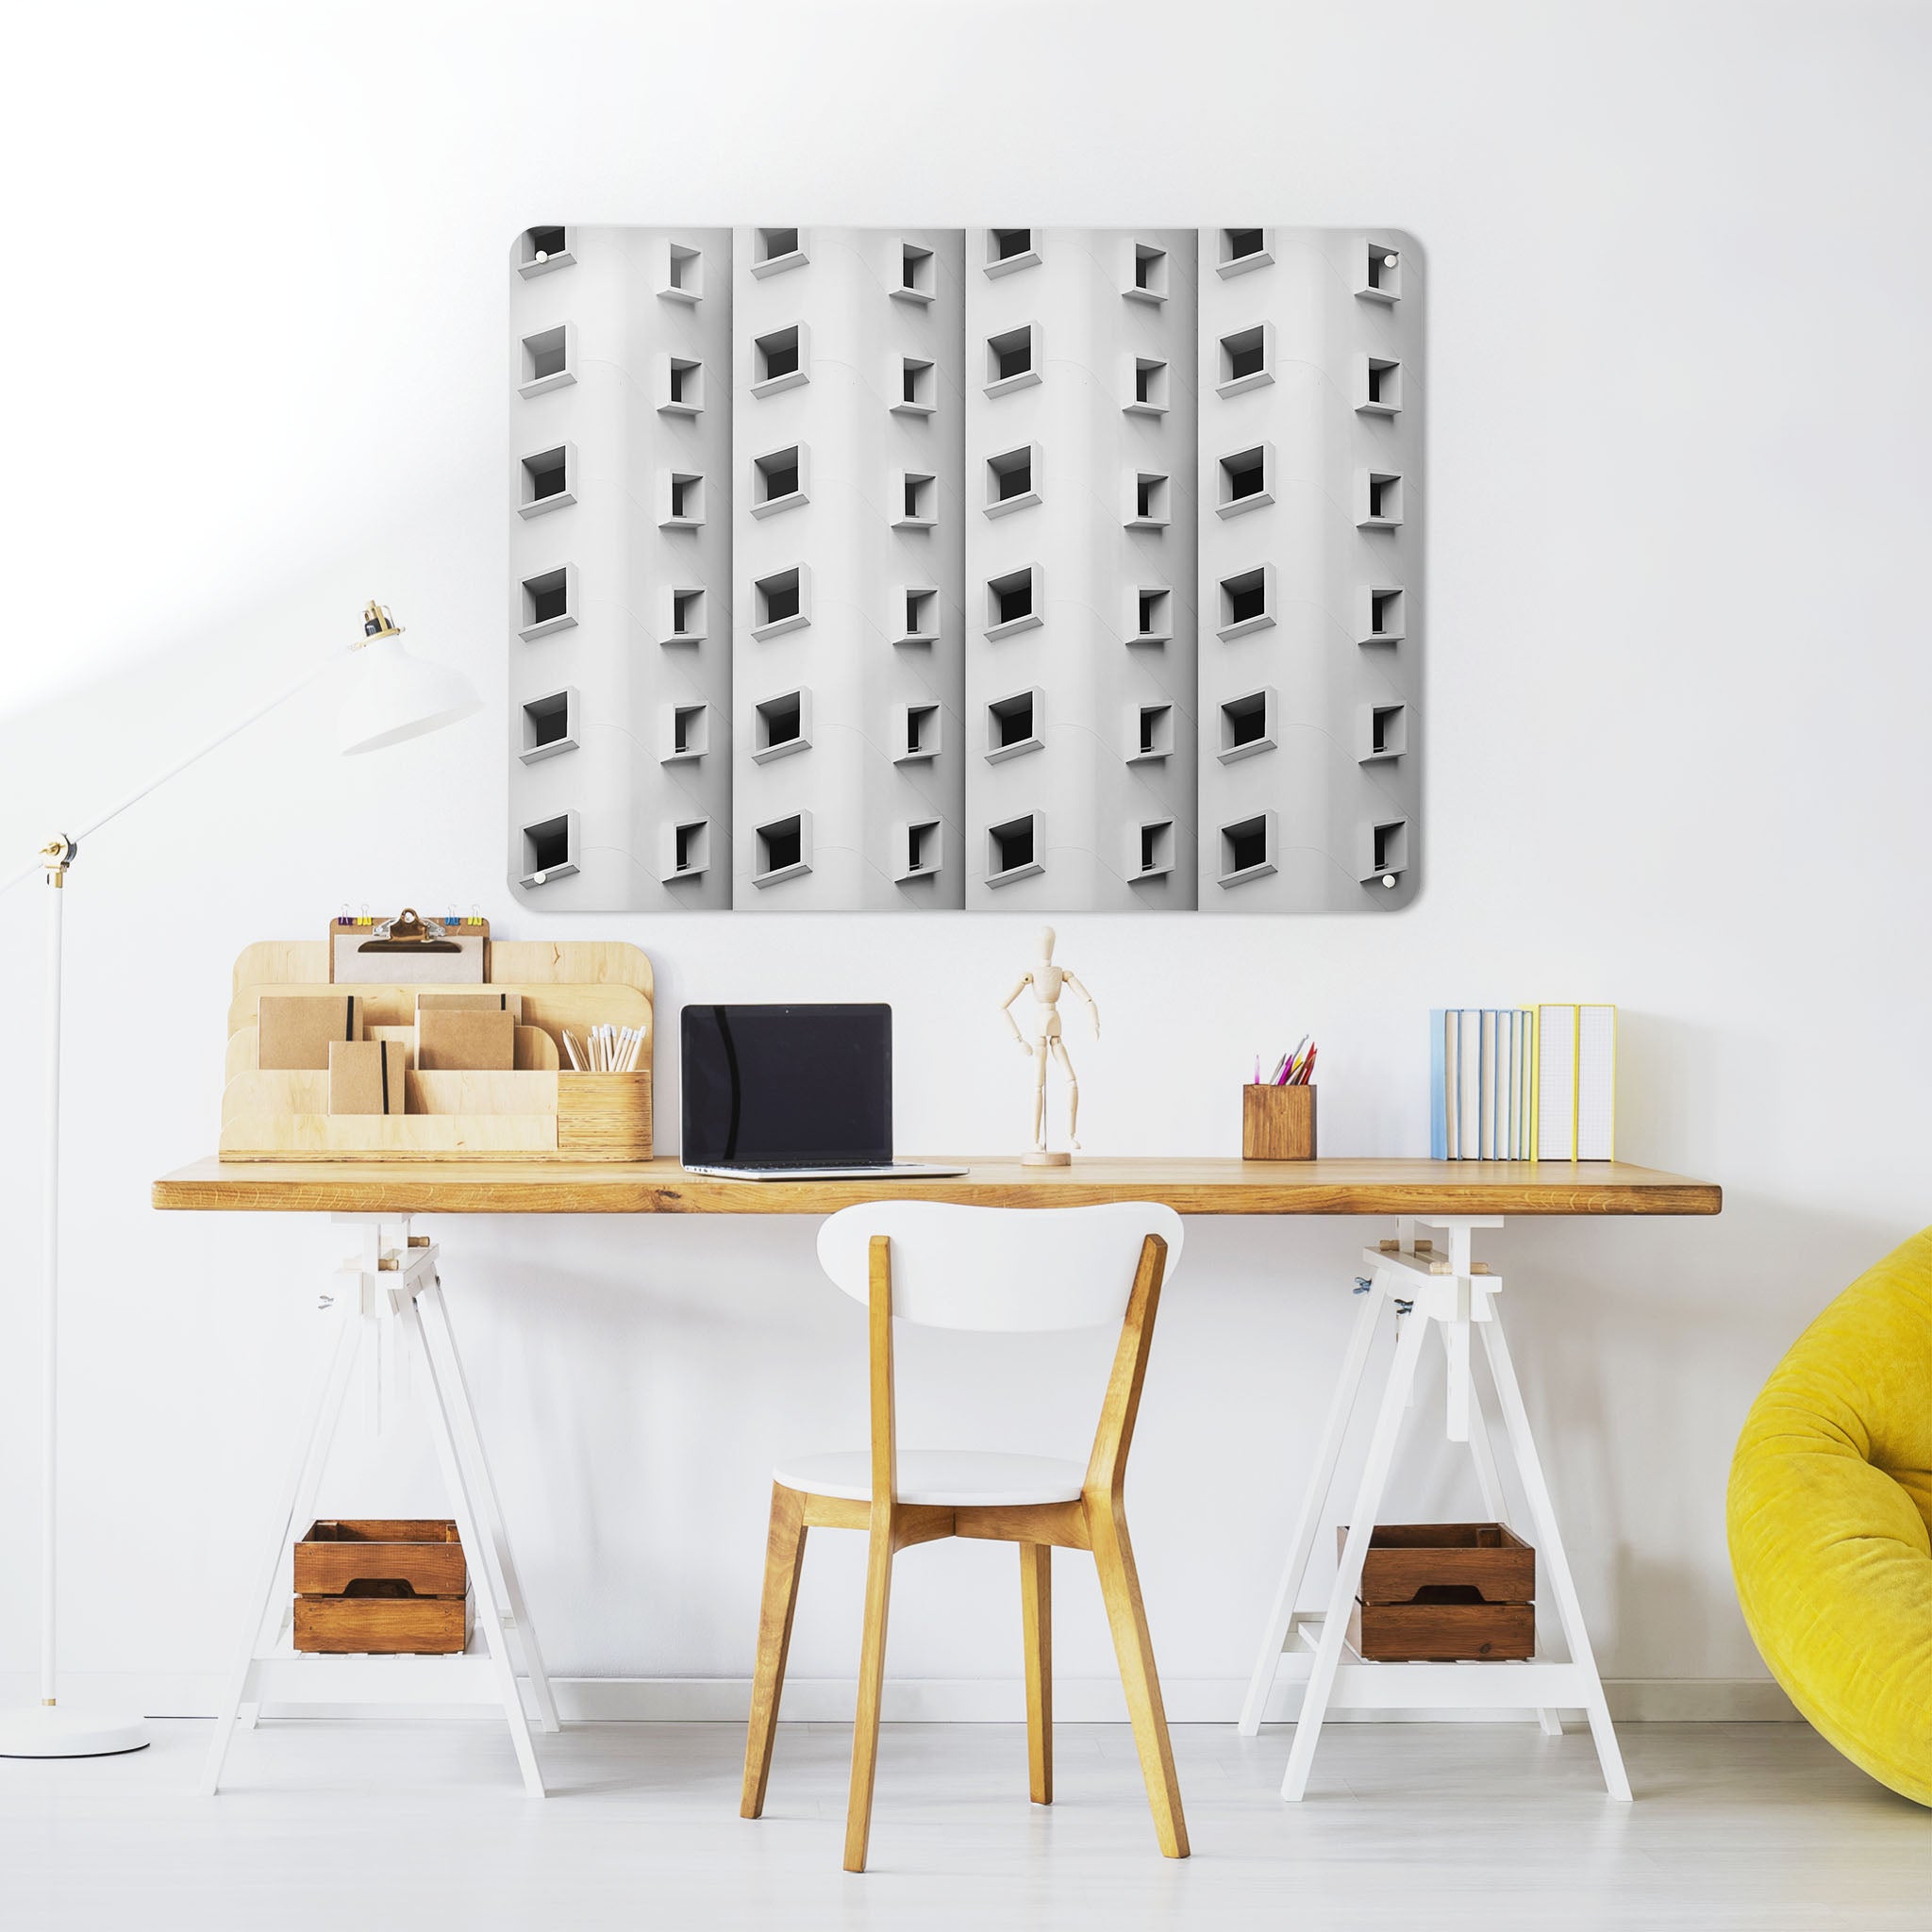 A desk in a workspace setting in a white interior with a magnetic metal wall art panel showing a black and white architectural photograph of a building with a pattern of windows